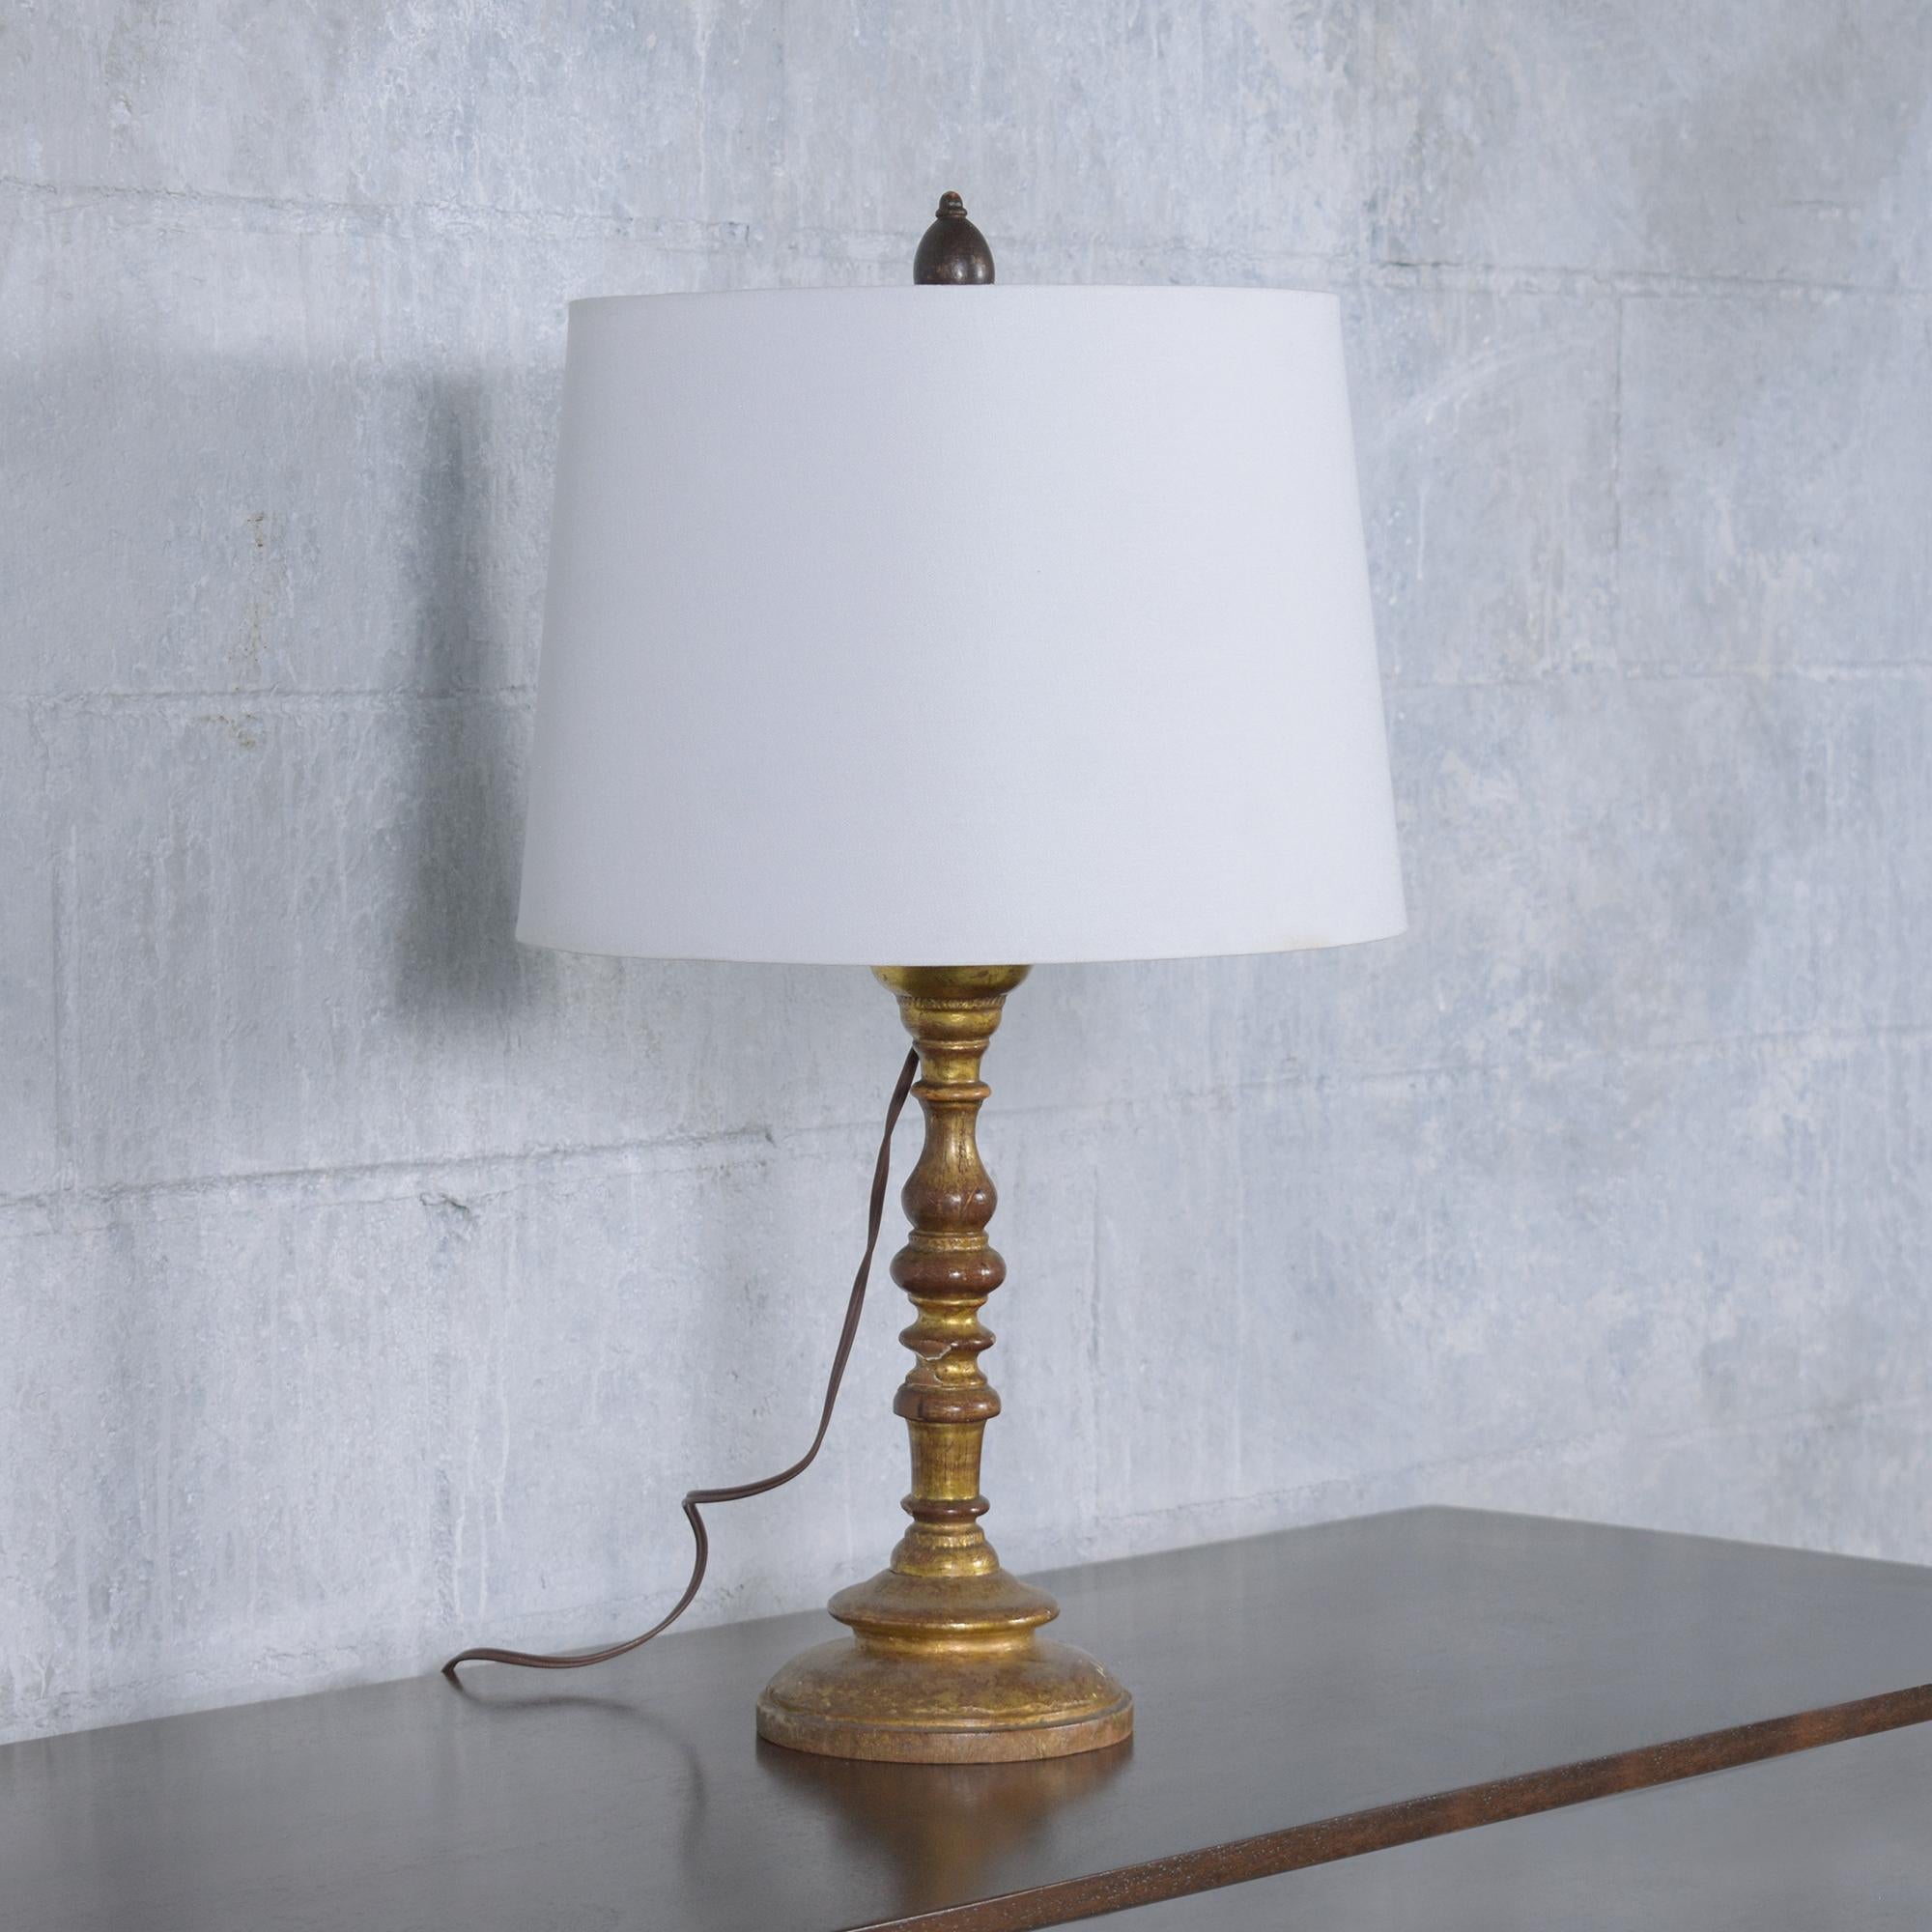 19th Century 19th-Century Hand-Crafted Giltwood Table Lamp with New Off-White Shade